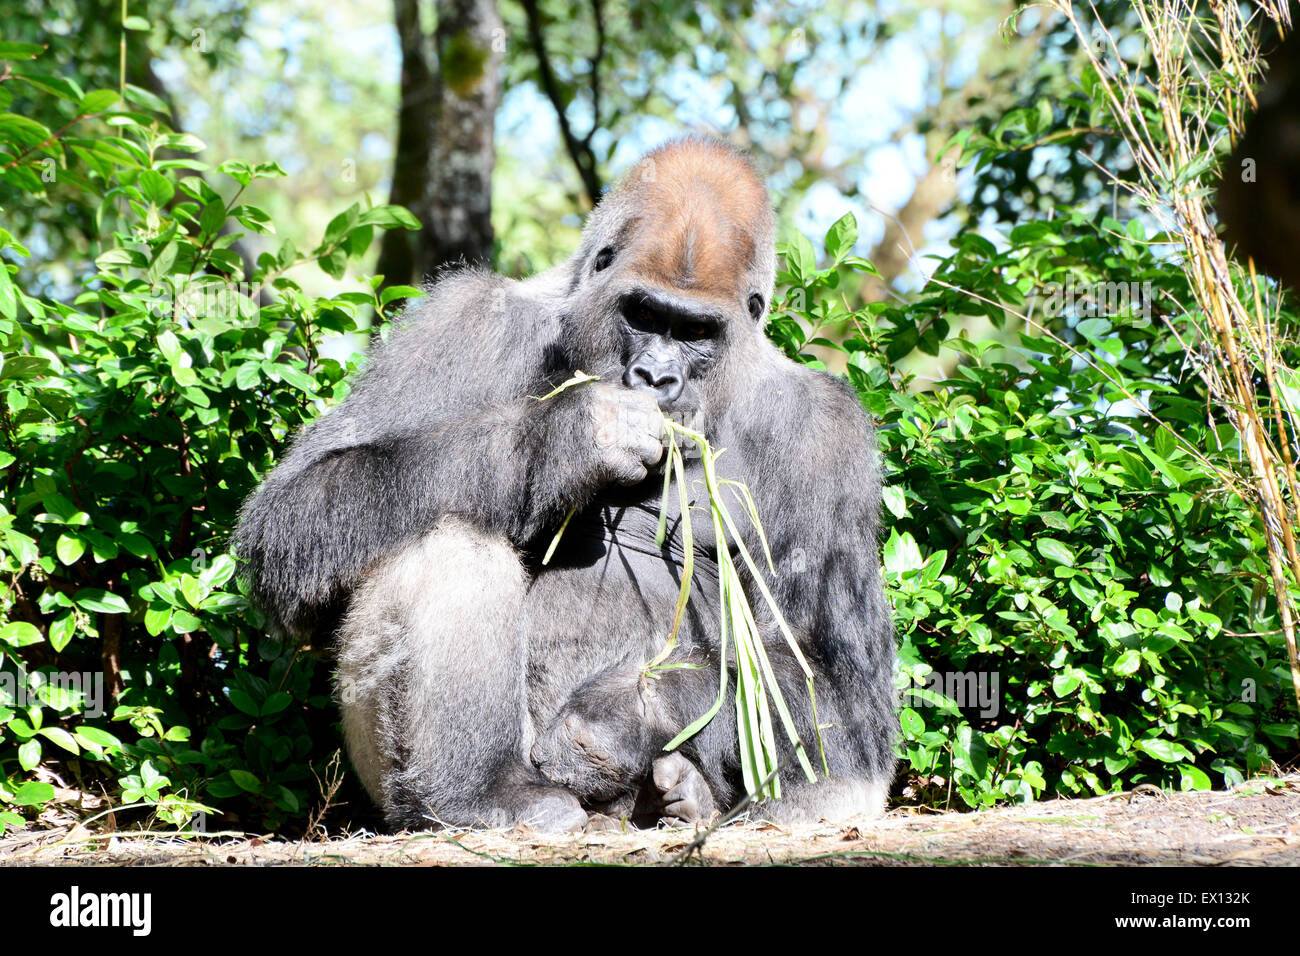 Big silver backed gorilla male sitting eating grass Stock Photo